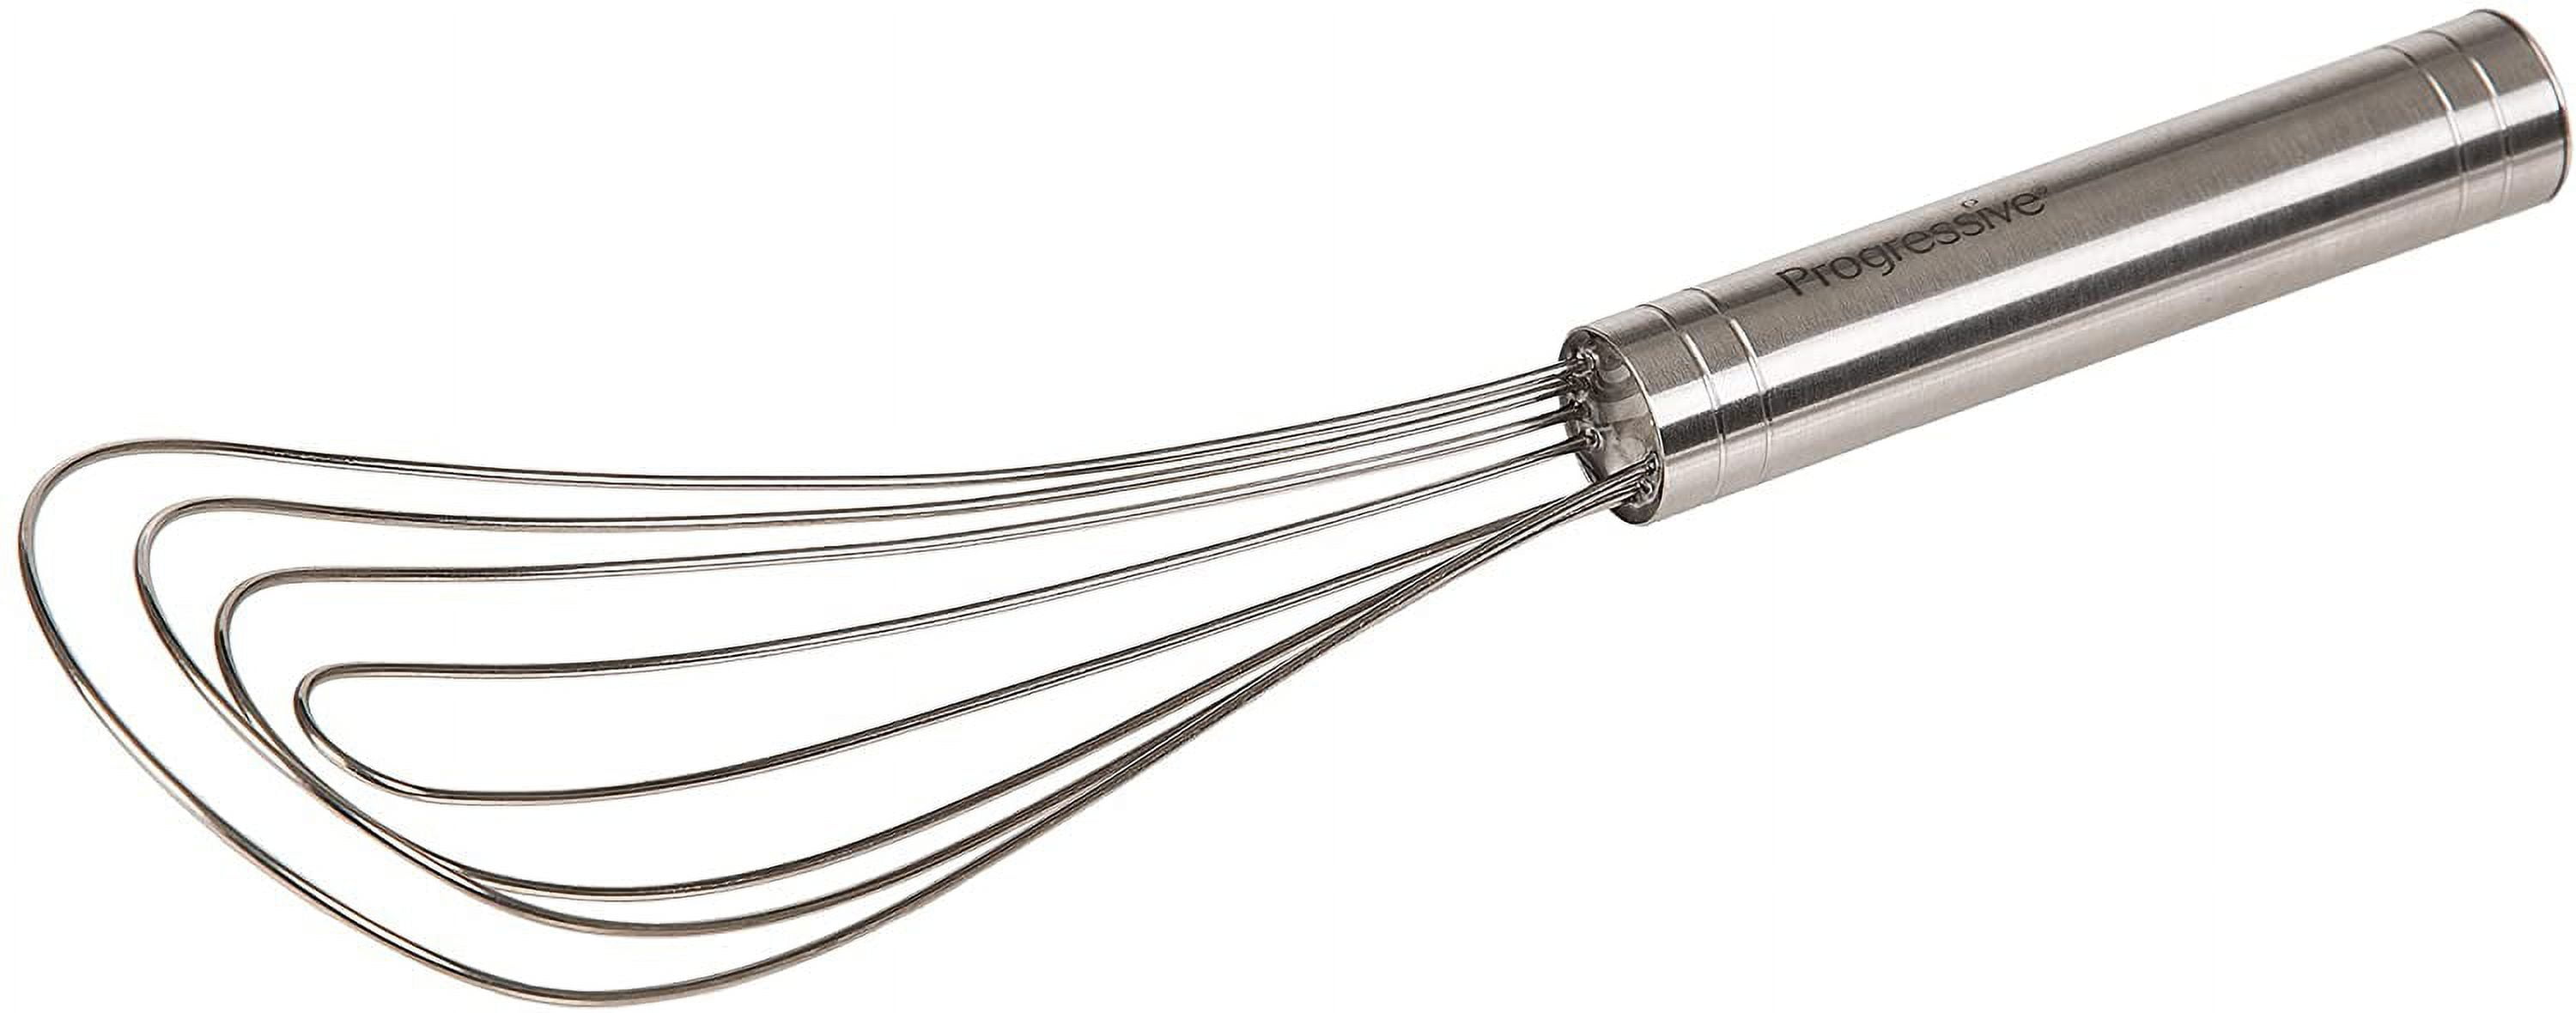  Rösle Stainless Steel Flat Whisk, 4 Wire, 10.6-inch